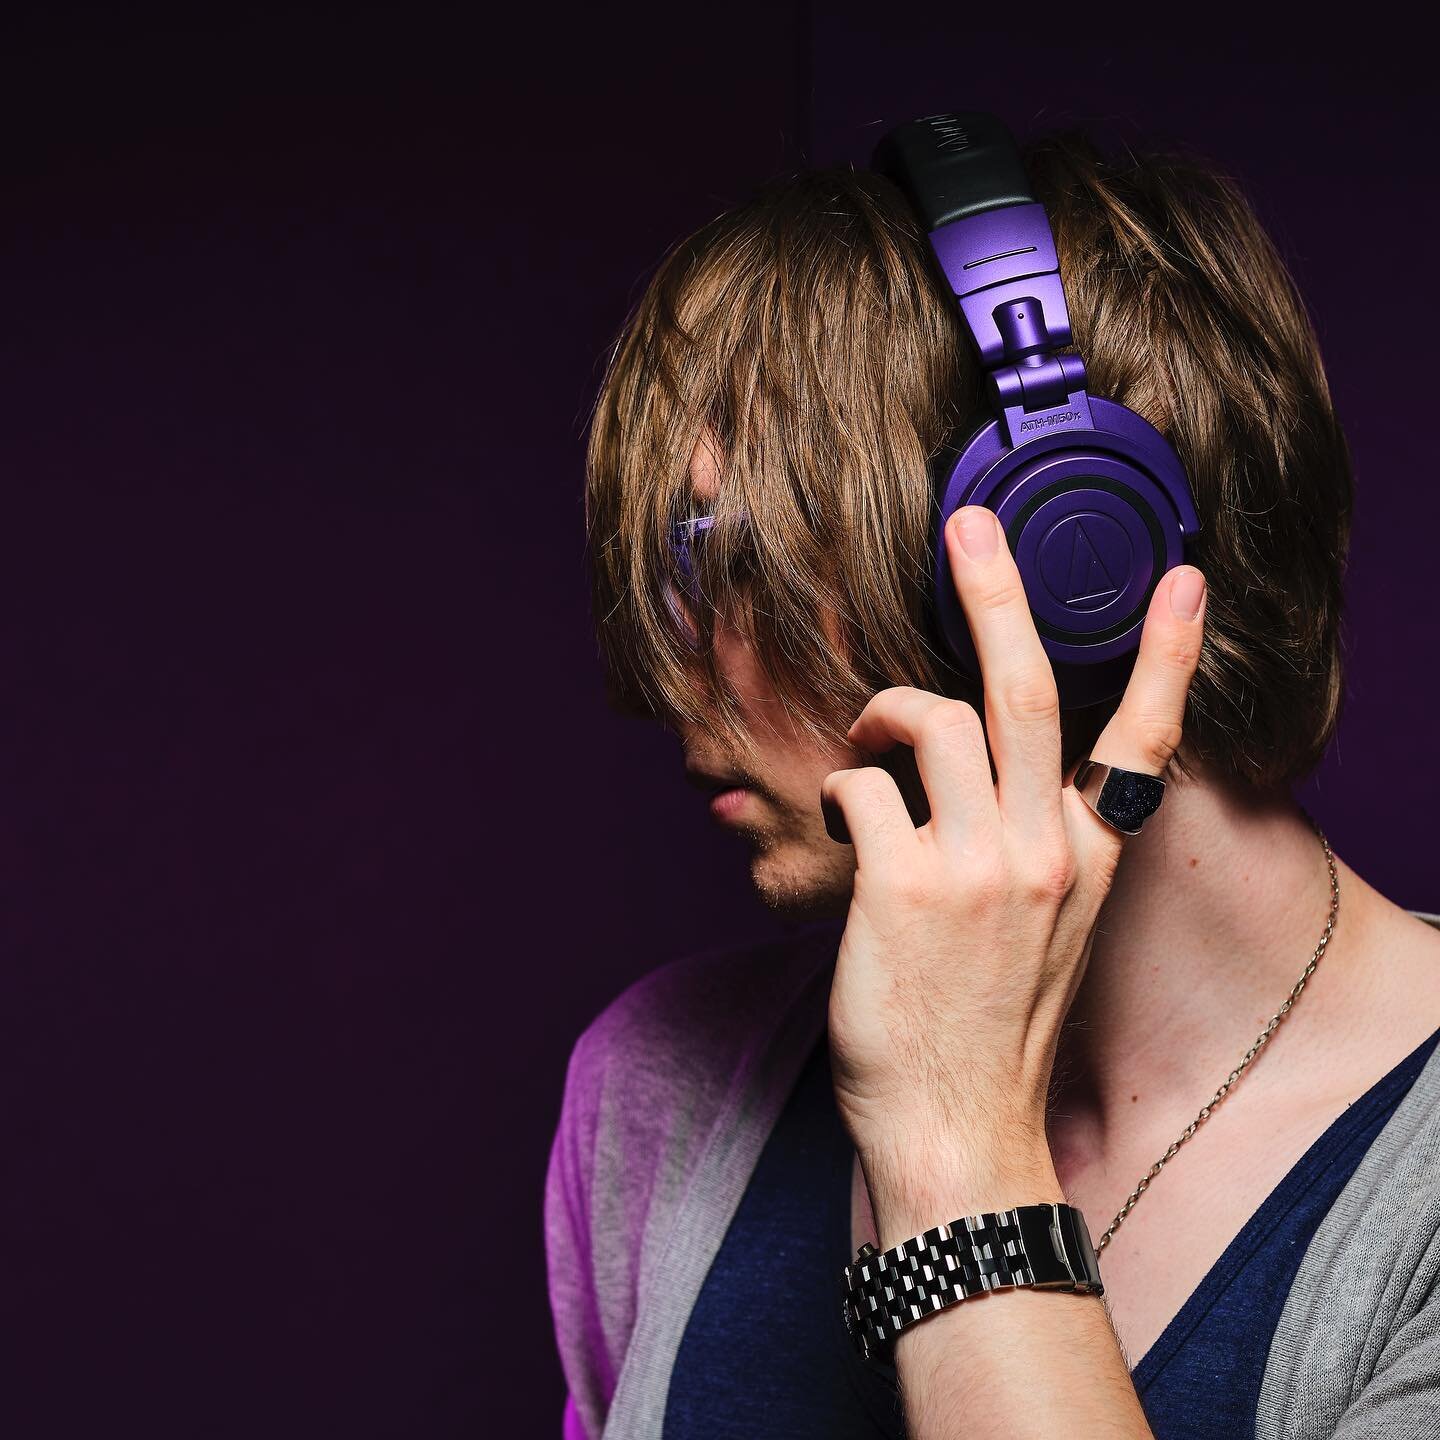 I LOVE these Audio Technica headphones so much. I&rsquo;ve already gushed over them on my personal channel @djyellets but I wanted to shoot a better photo. I love color matching in photos. Since these headphones were purple, I went for a deep purple 